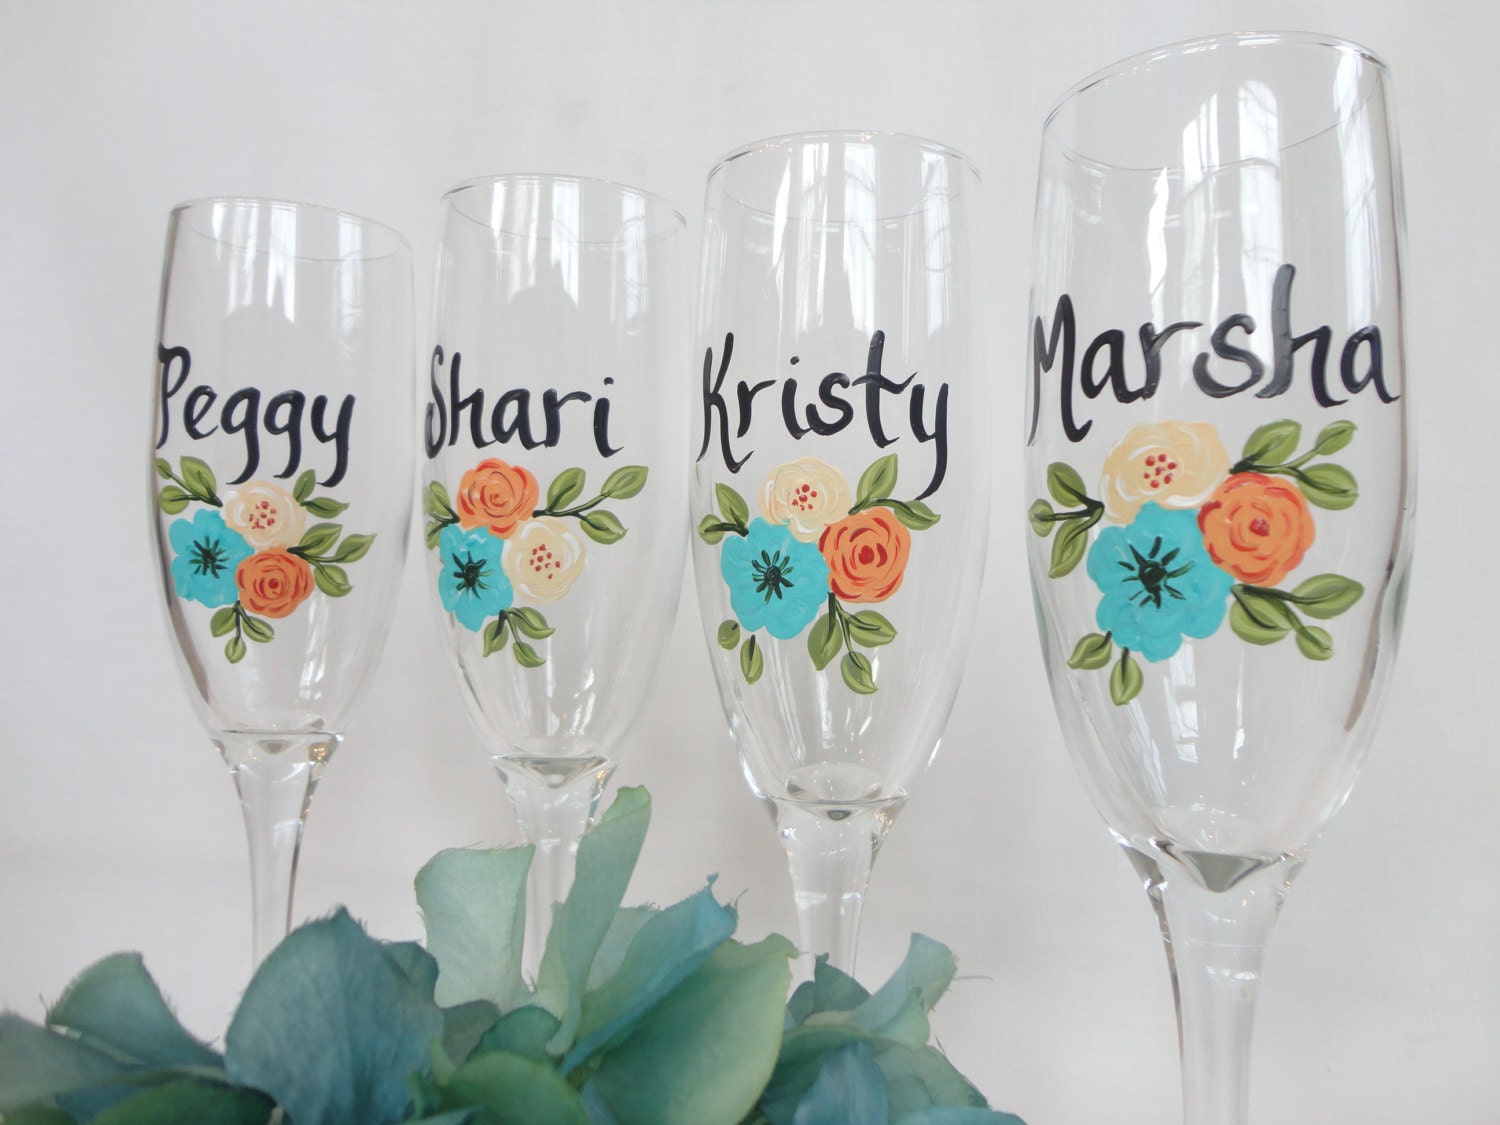 HAND PAINTED PERSONALISED CHAMPAGNE OR WINE GLASS BIRTHDAY BRIDESMAID HEN PARTY